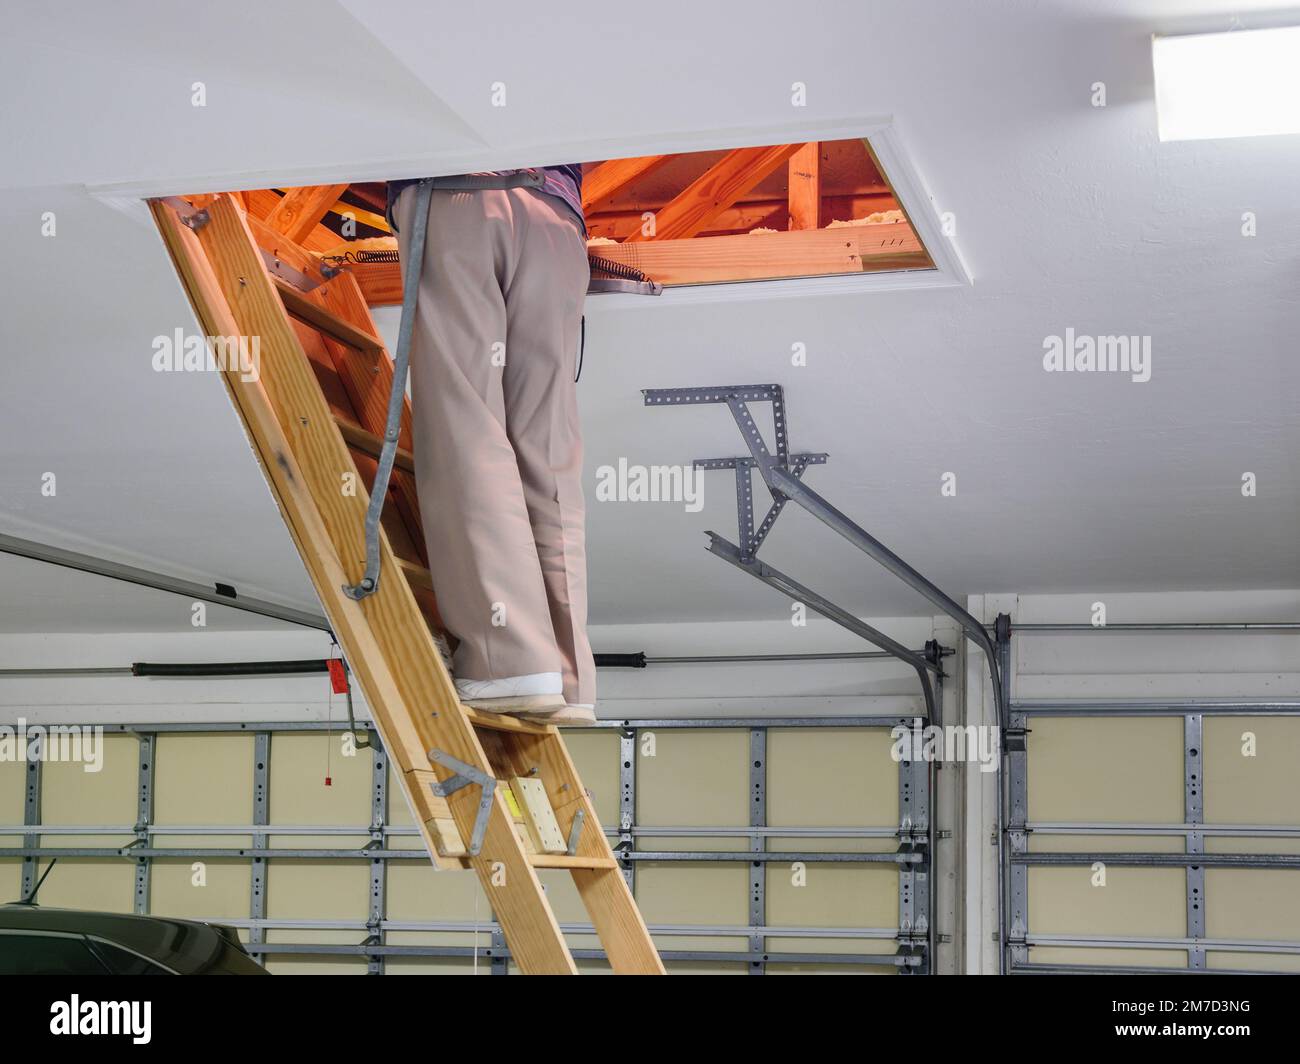 https://c8.alamy.com/comp/2M7D3NG/man-inspecting-garage-attic-male-homeowner-climbing-wooden-pull-down-attic-ladder-stairs-2M7D3NG.jpg